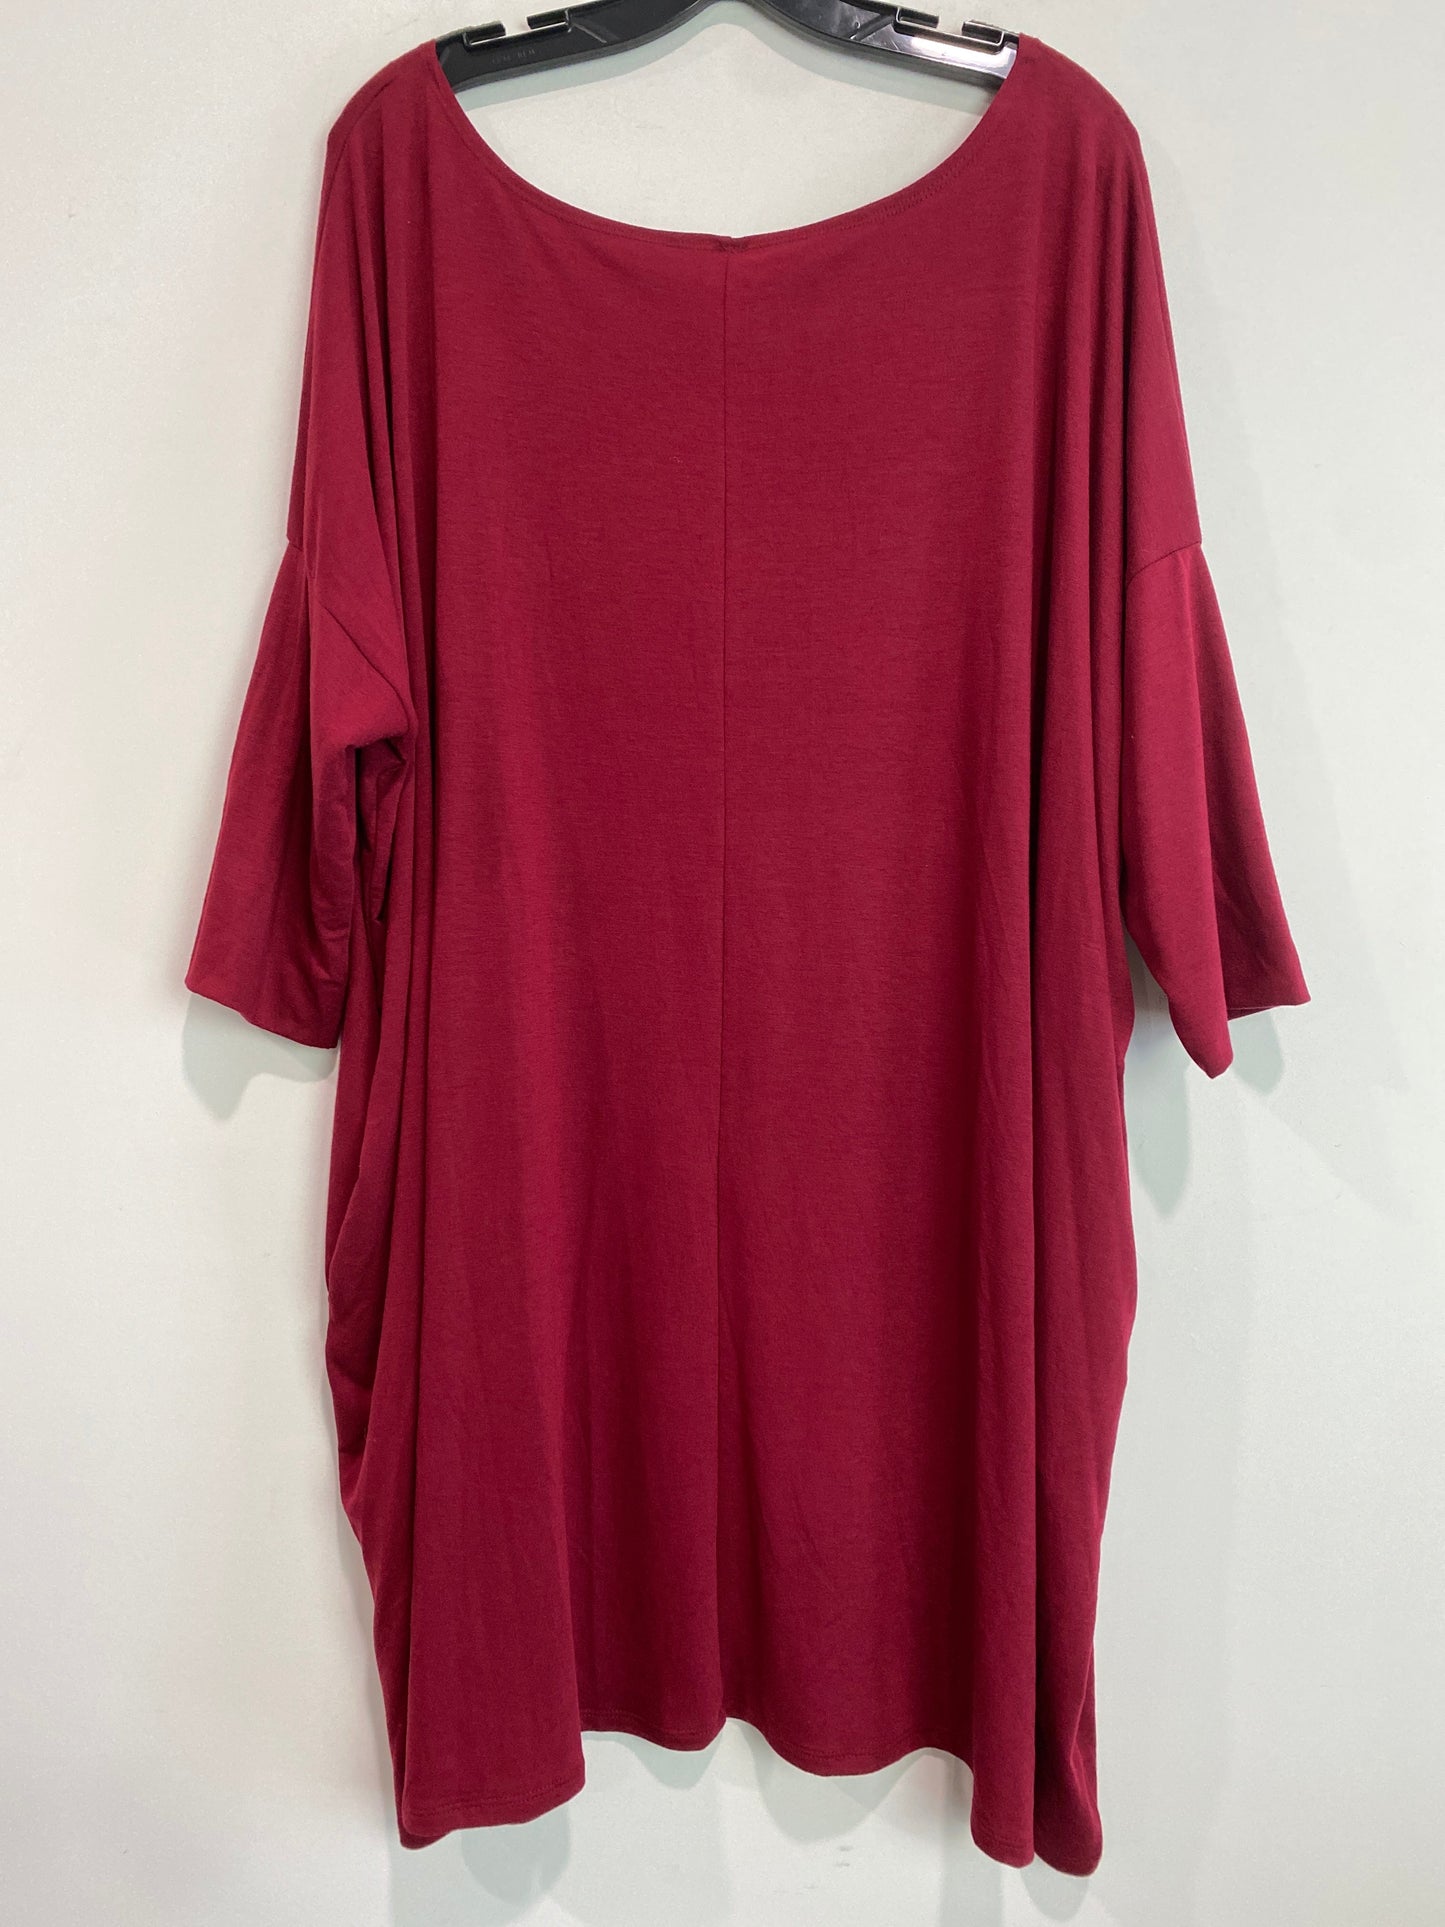 Red Tunic 3/4 Sleeve Zenana Outfitters, Size 3x